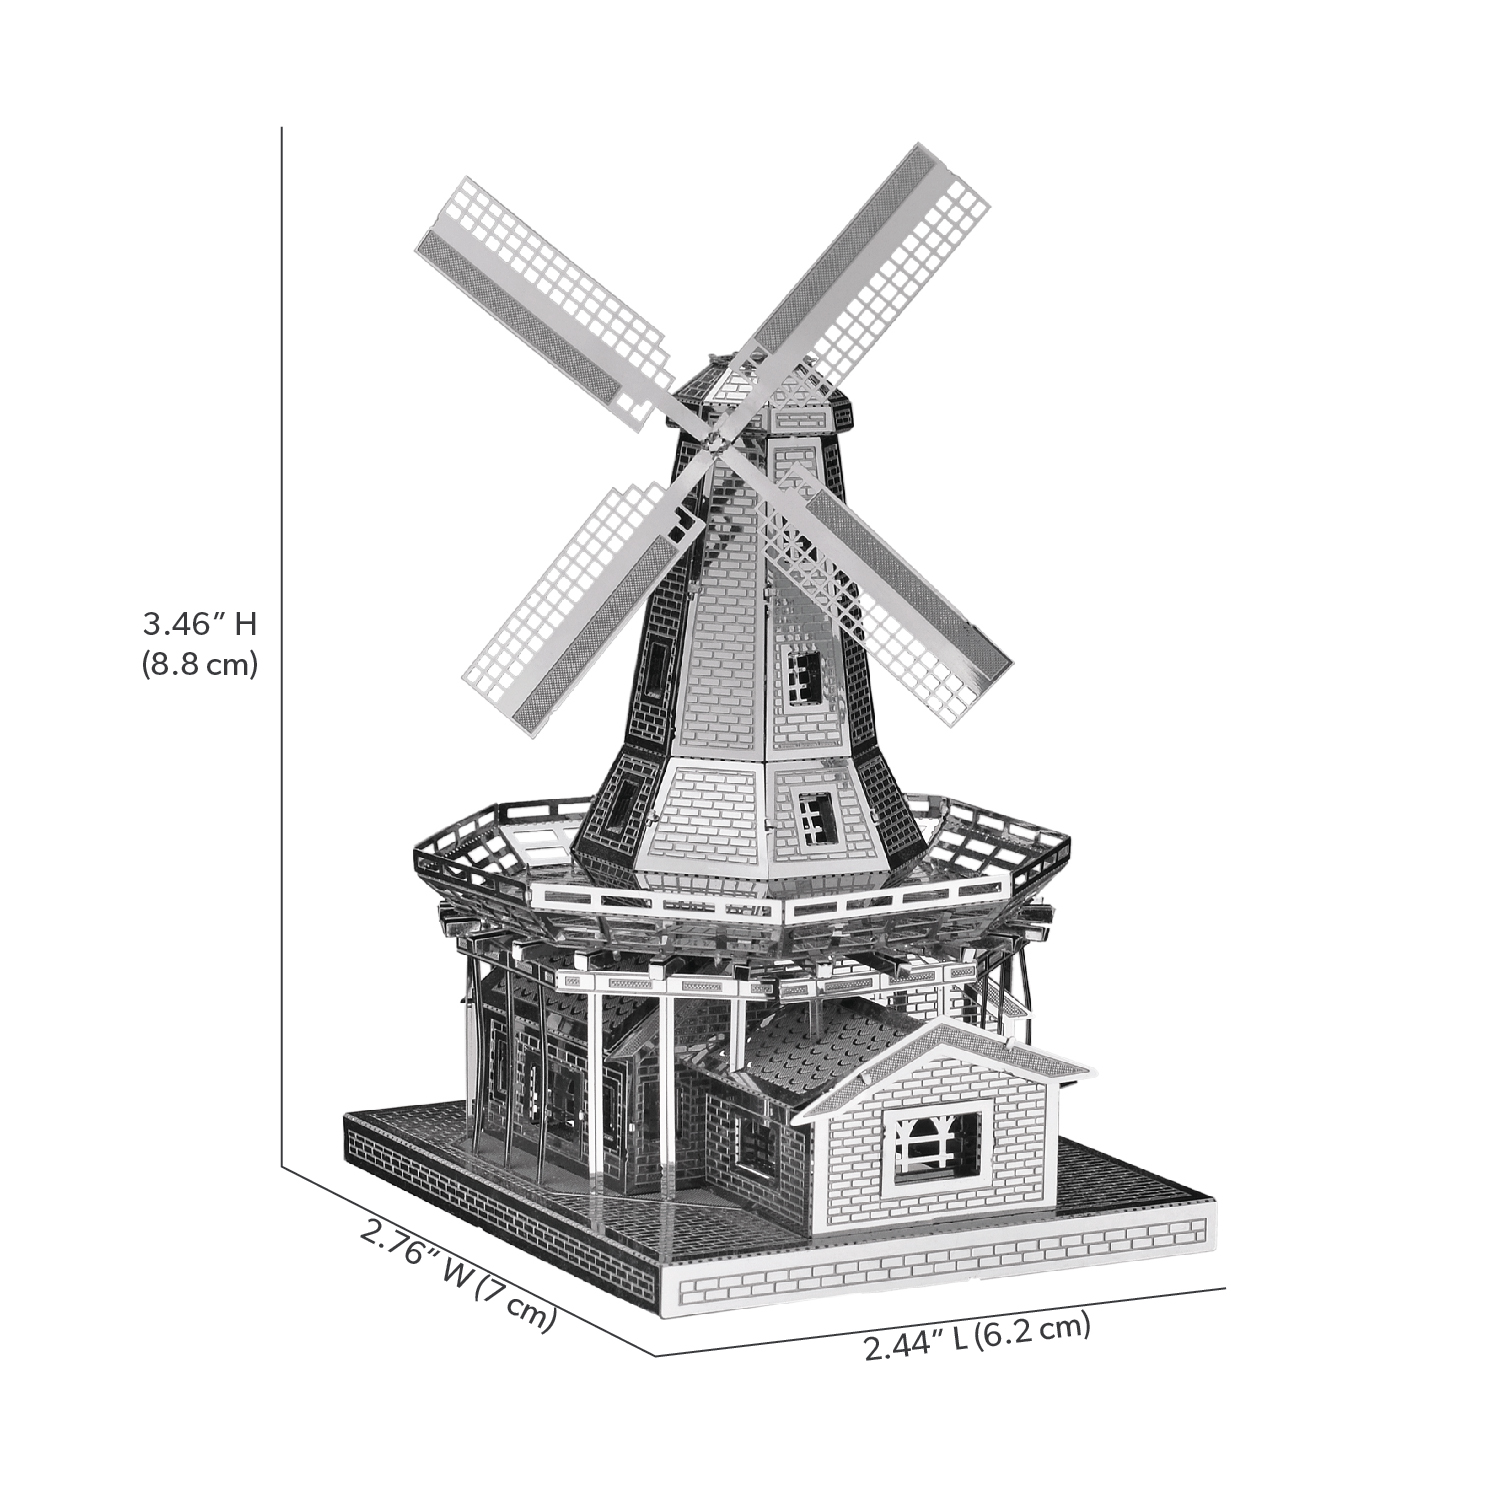 Building Plans for Dutch Industrial Windmills 1850